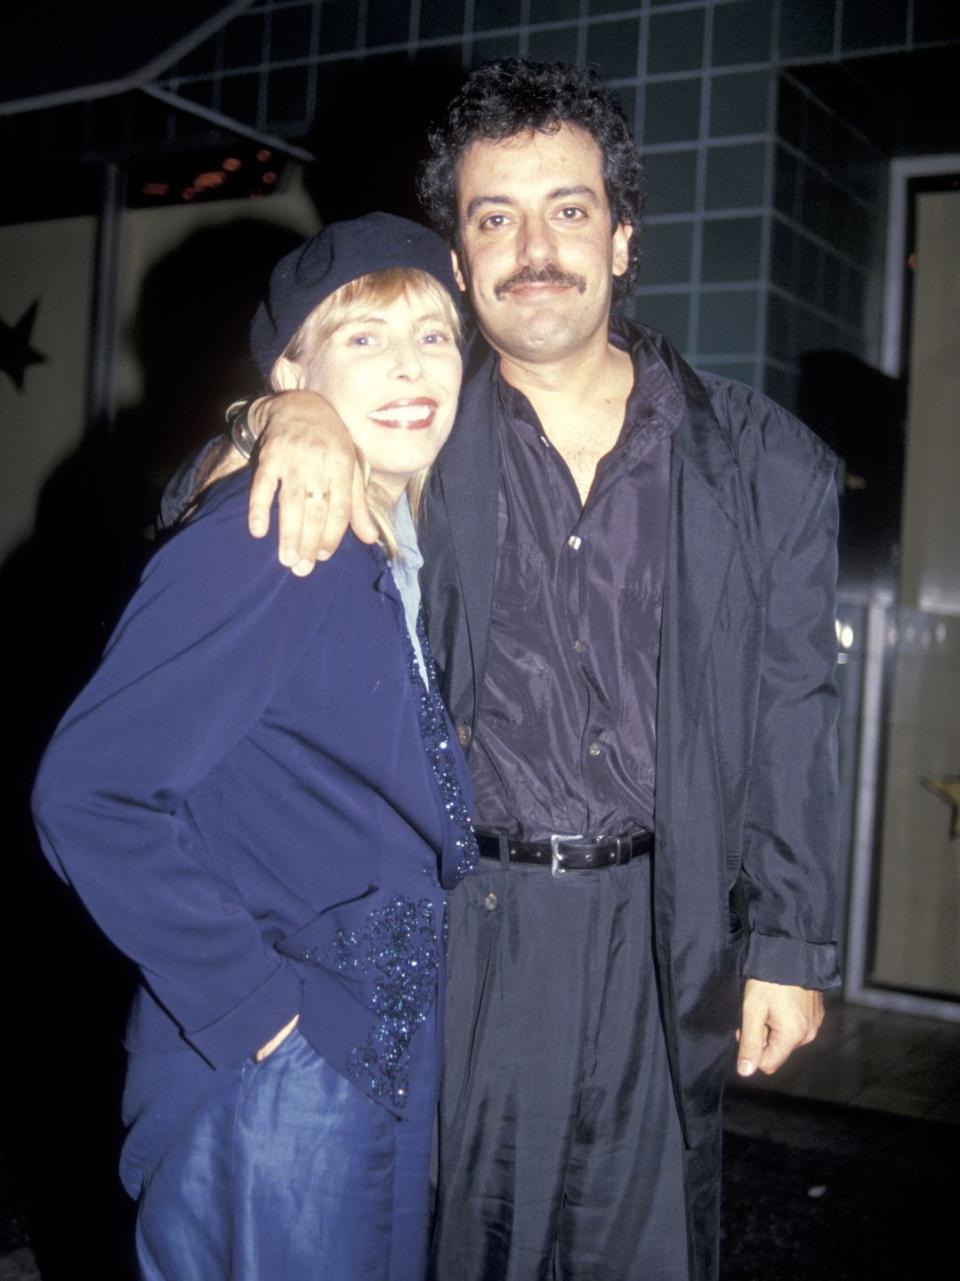 joni mitchell and larry klein smile for a photo while standing and hugging, she wears a beret and blue jacket, he wears a dark suit with a purple collared shirt